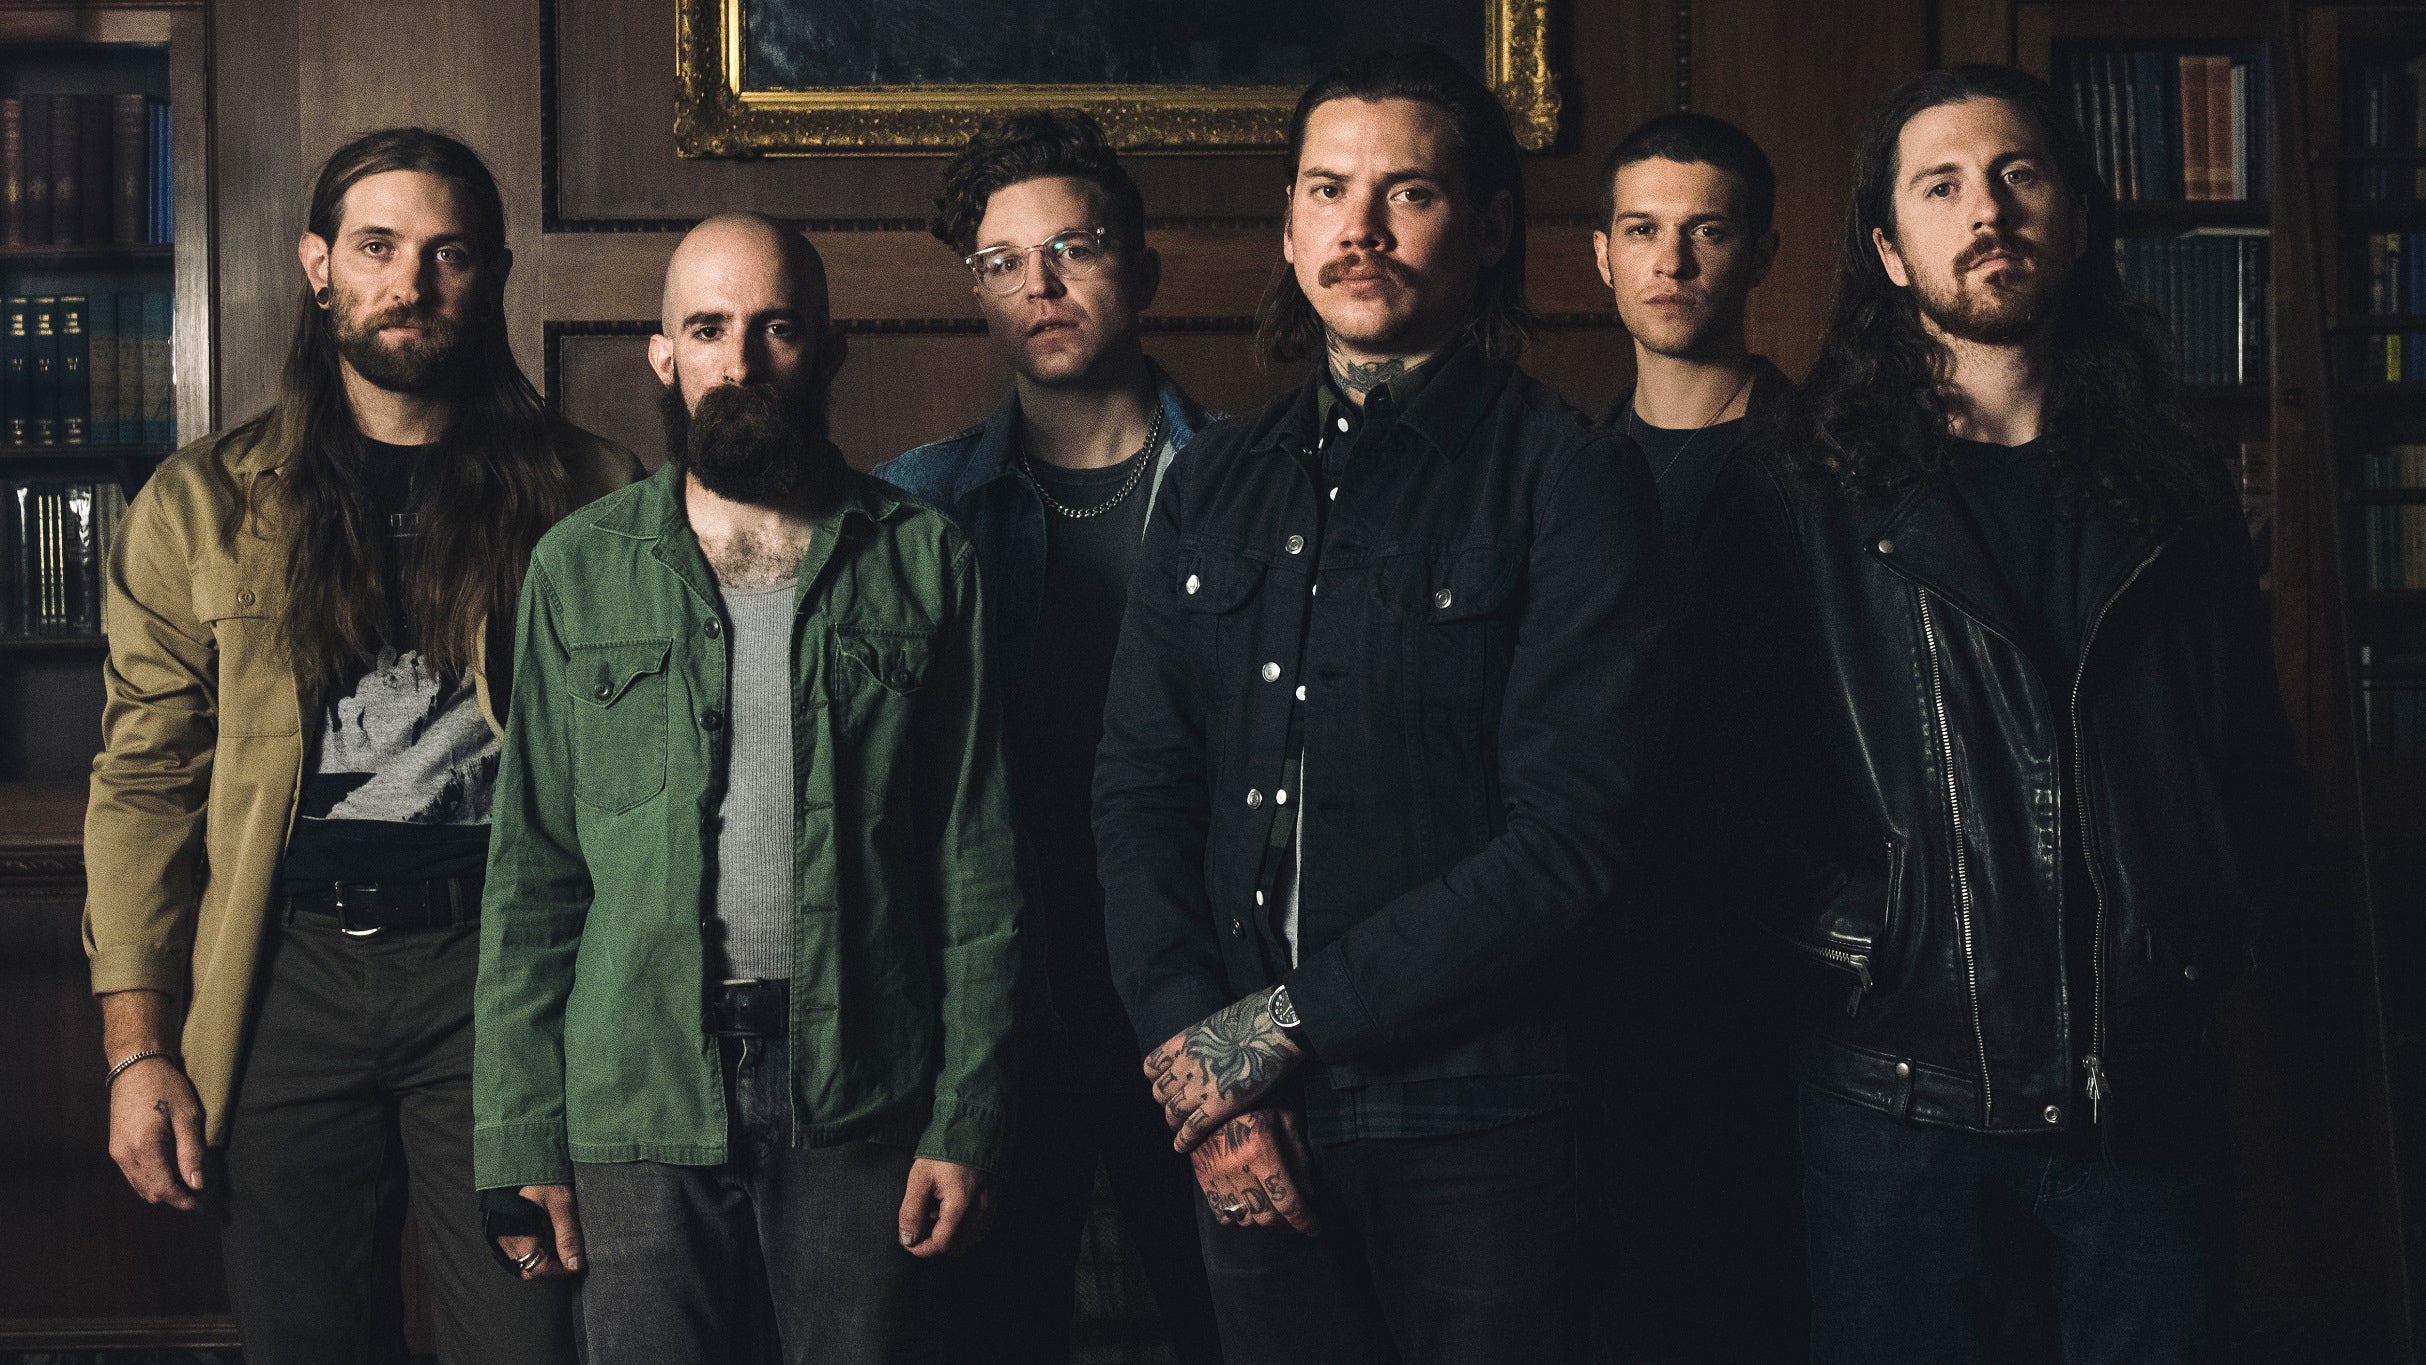 The Devil Wears Prada & Fit For A King: METALCORE DROPOUTS in Cleveland promo photo for Exclusive presale offer code